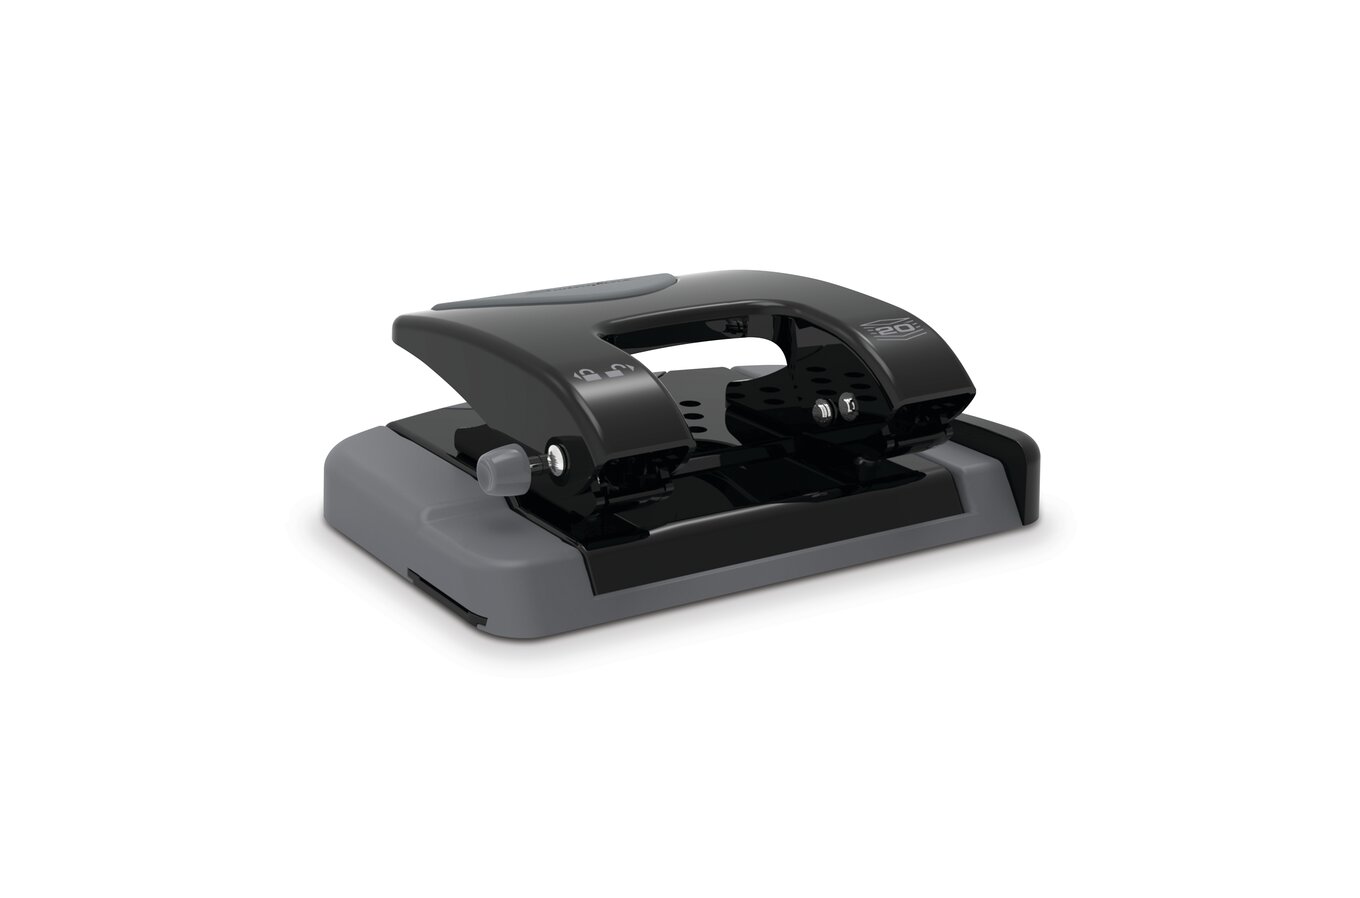 0.2 Single Hole Punch Handheld Hole Puncher with Soft Grip Square